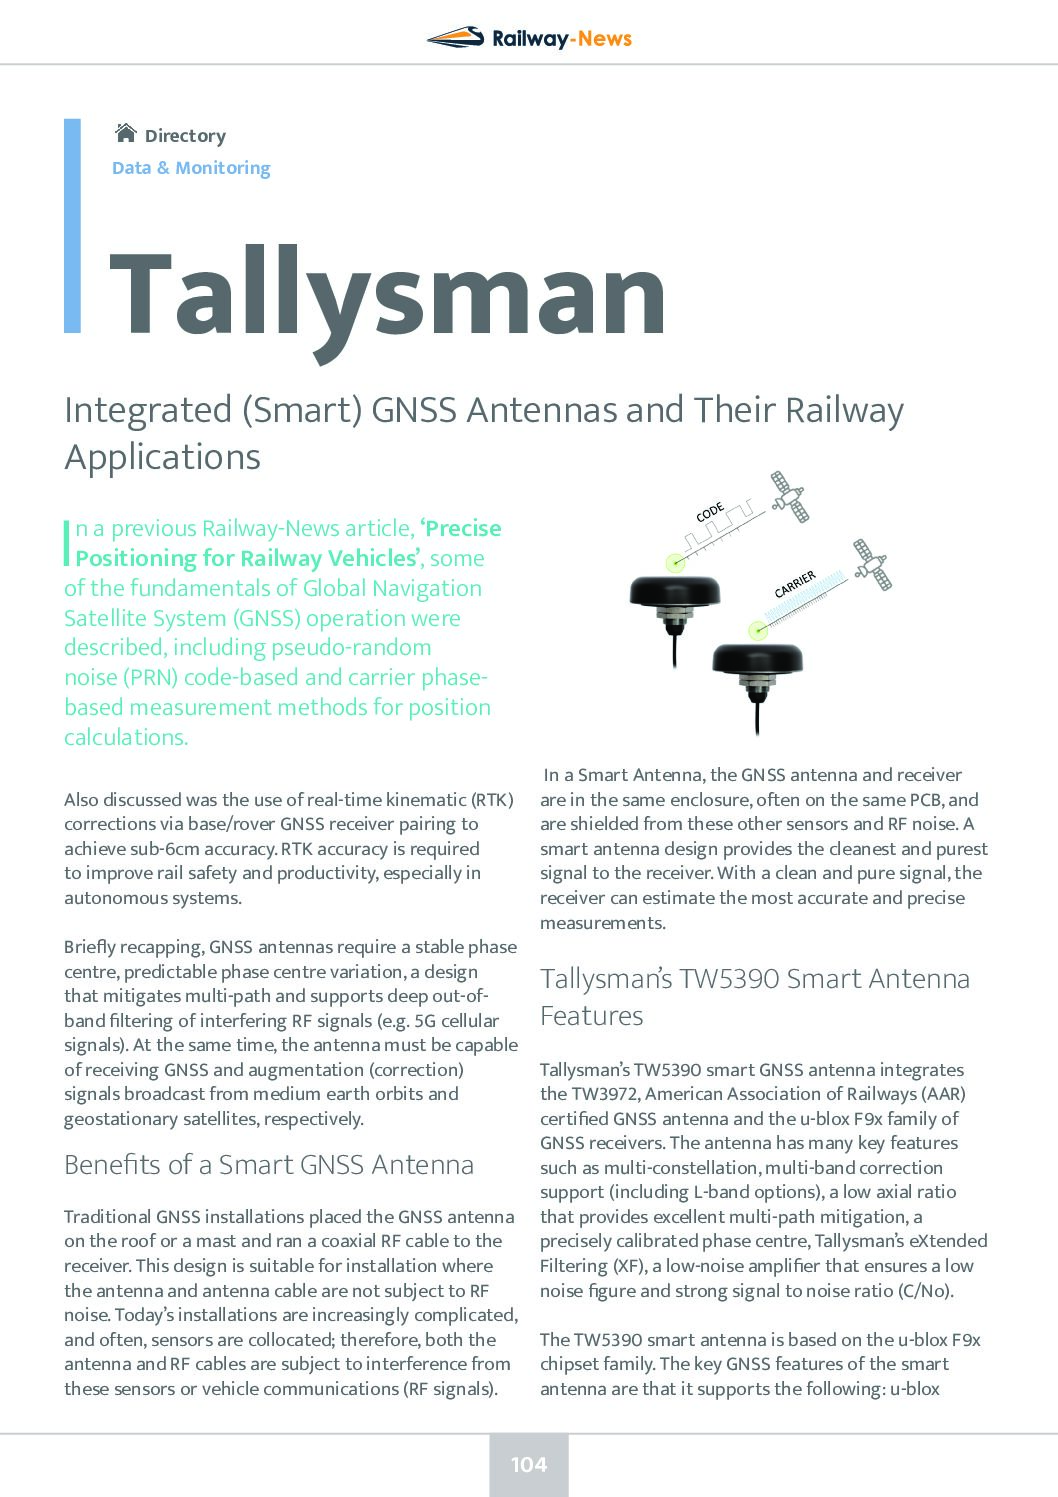 Integrated (Smart) GNSS Antennas and Their Railway Applications